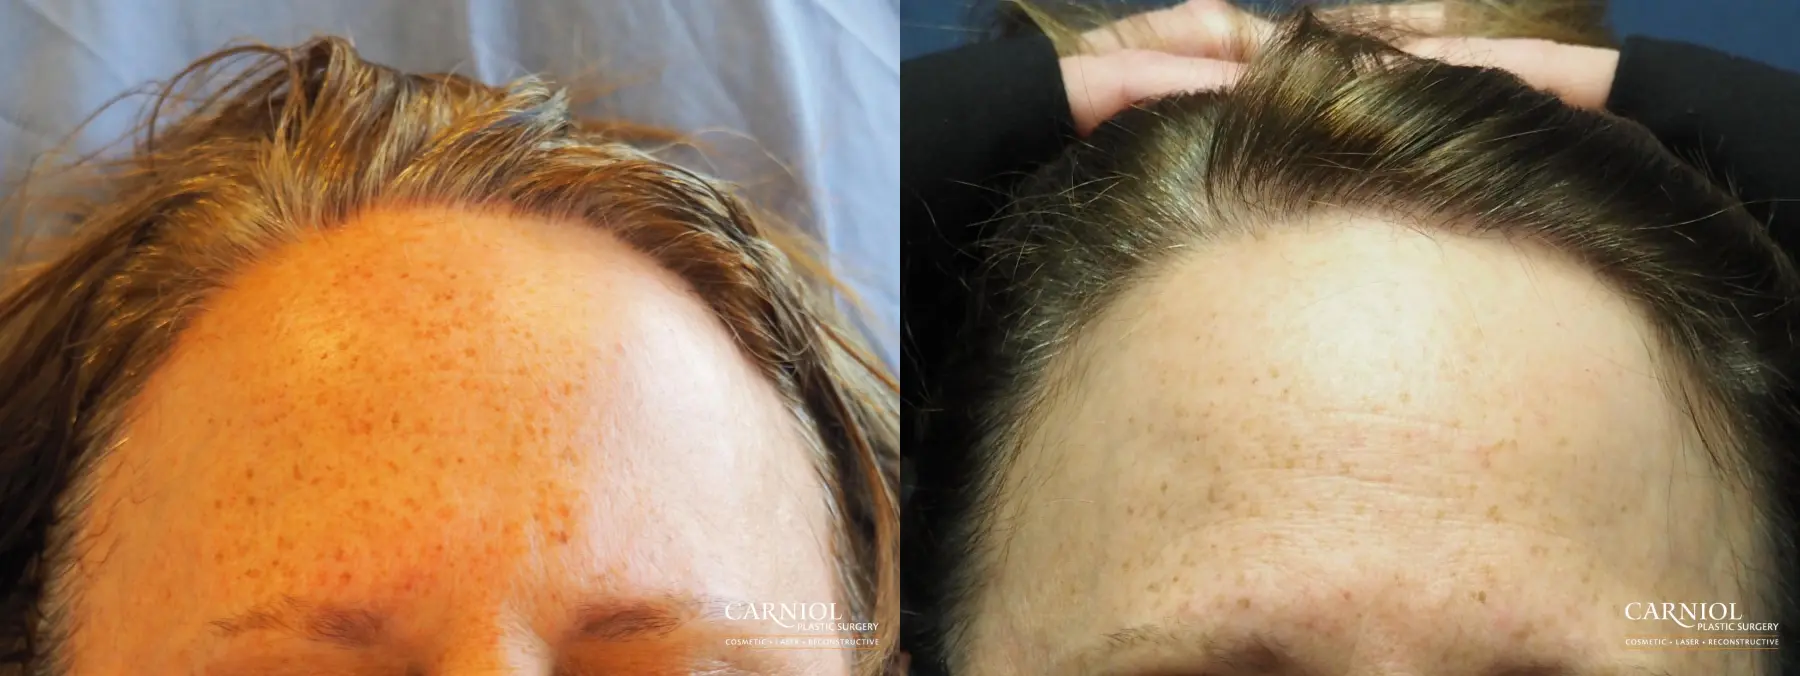 Nonsurgical Hair Restoration: Patient 1 - Before and After 1